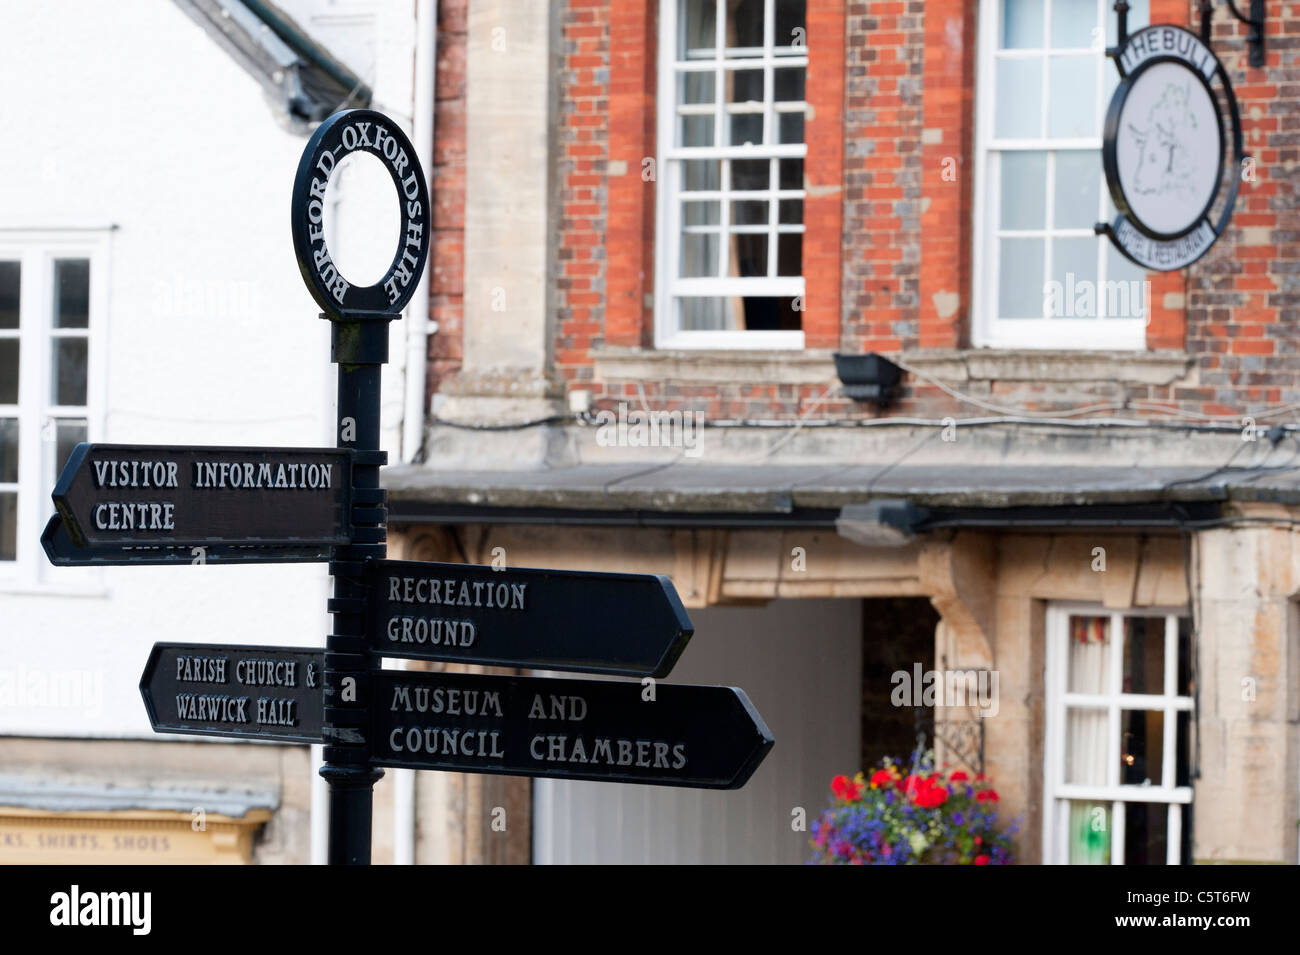 Directional sign in Burford high street. Cotswolds, England Stock Photo